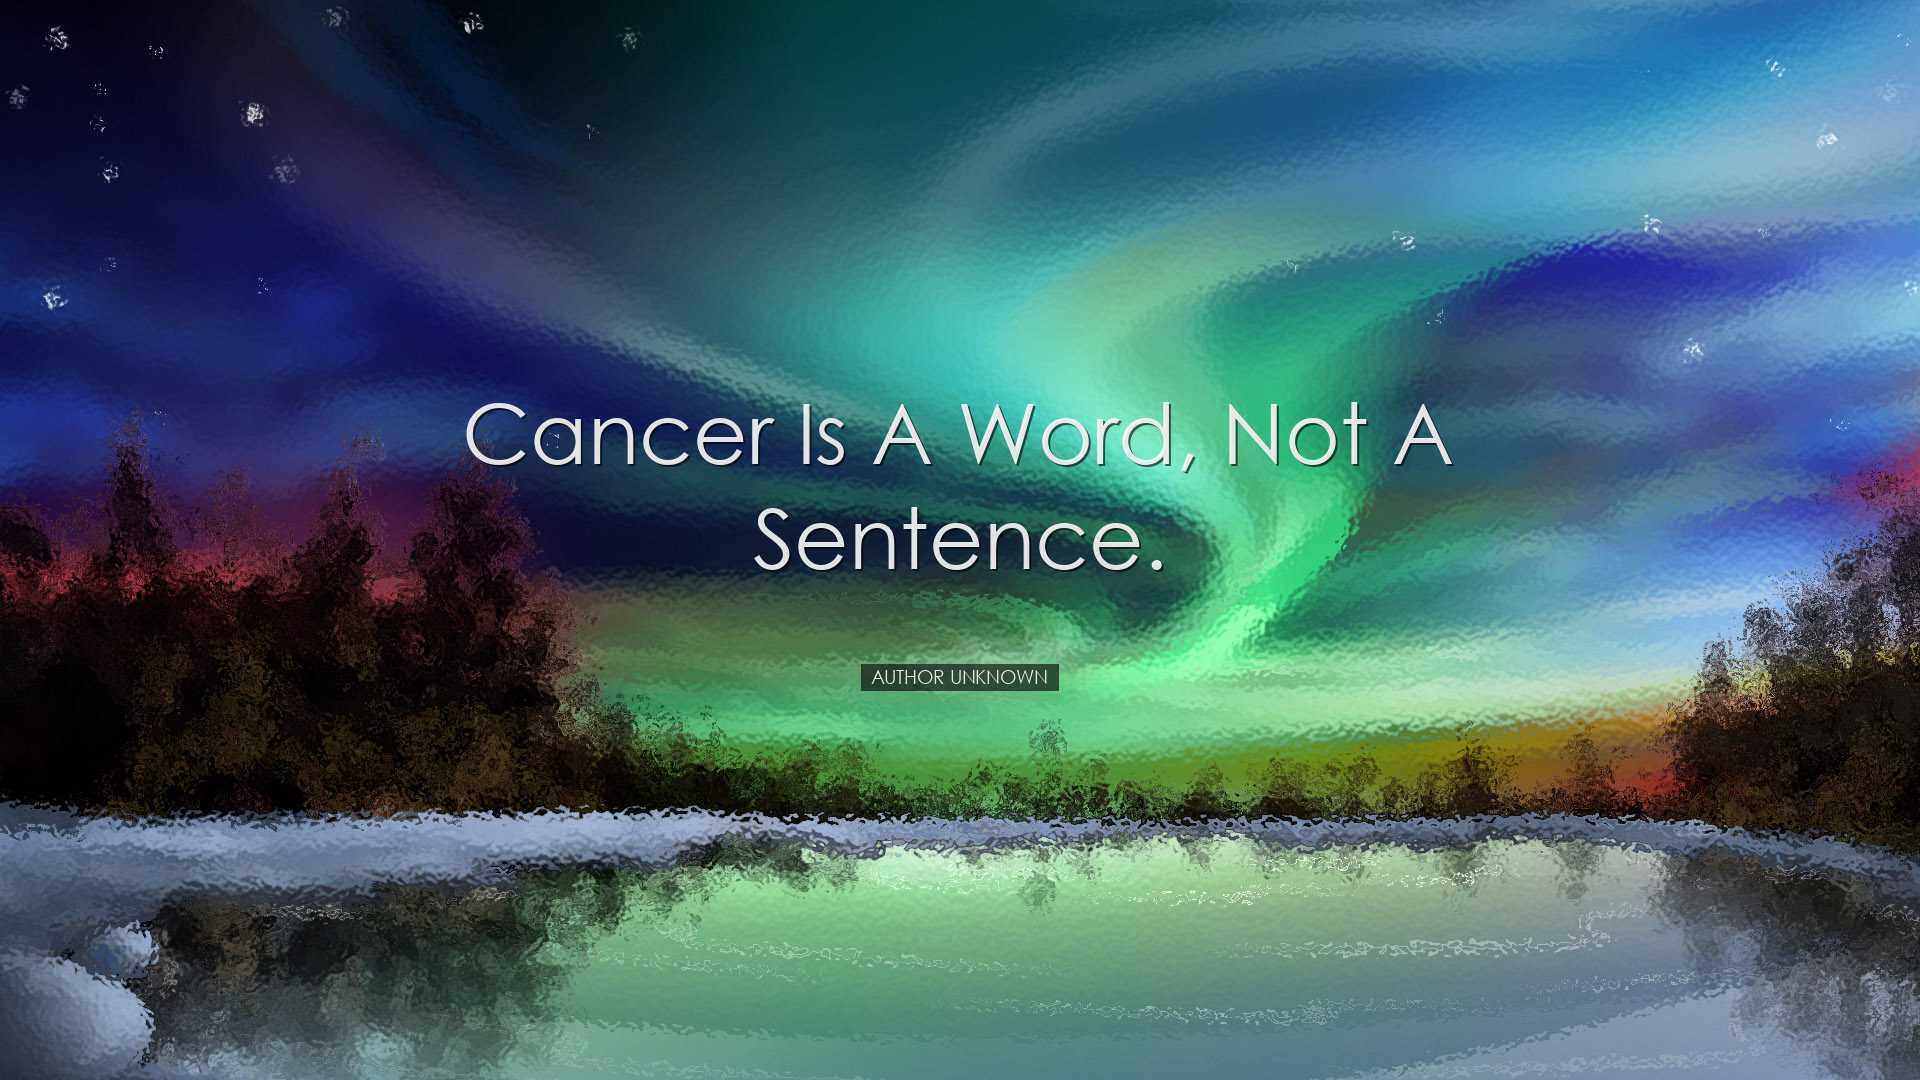 Cancer is a word, not a sentence. - Author Unknown